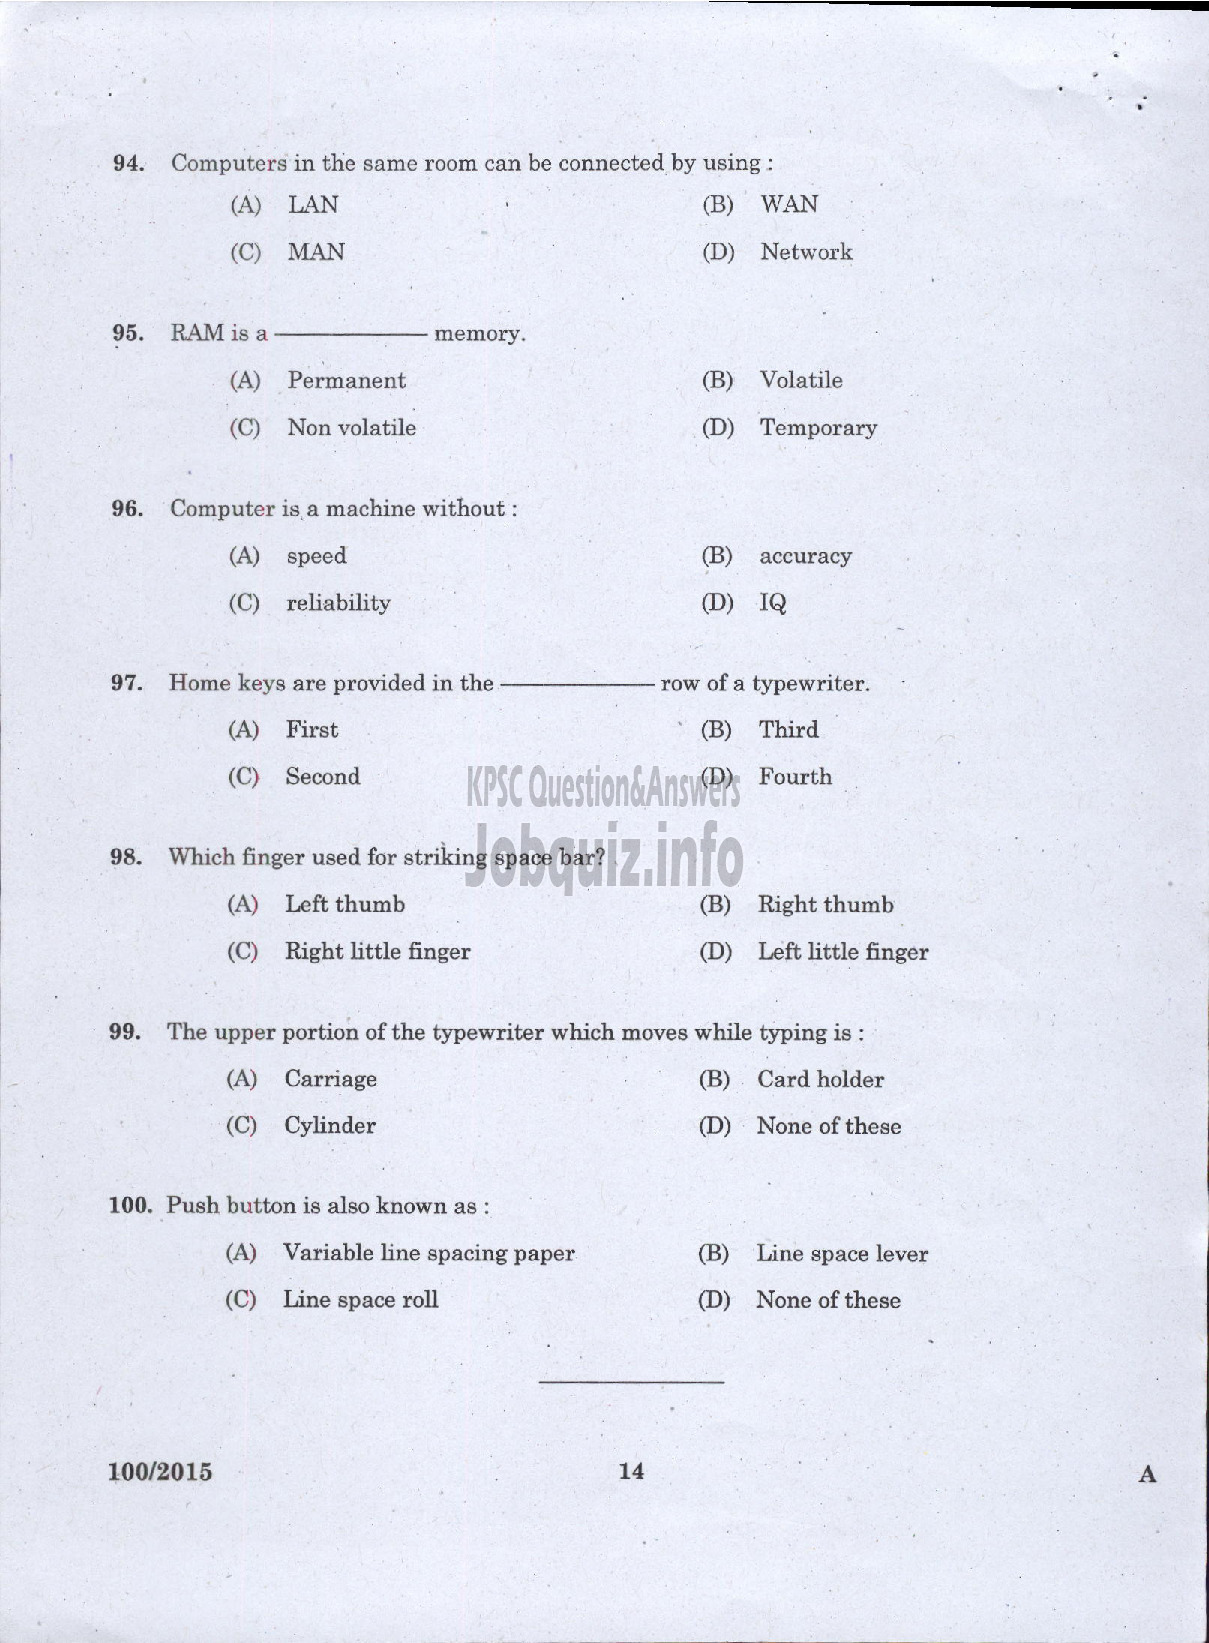 Kerala PSC Question Paper - TYYPIST GRADE II / STENO TYPIST / CLERK TYPIST / TYPIST KERALA STATE HOUSING BOARD / KERALA SHIPPING AND INLAND NAVIGATION CORP LTD / VARIOUS / KERALA ELECTRICAL AND ALLIED ENGINEERING COMPANY LTD-12